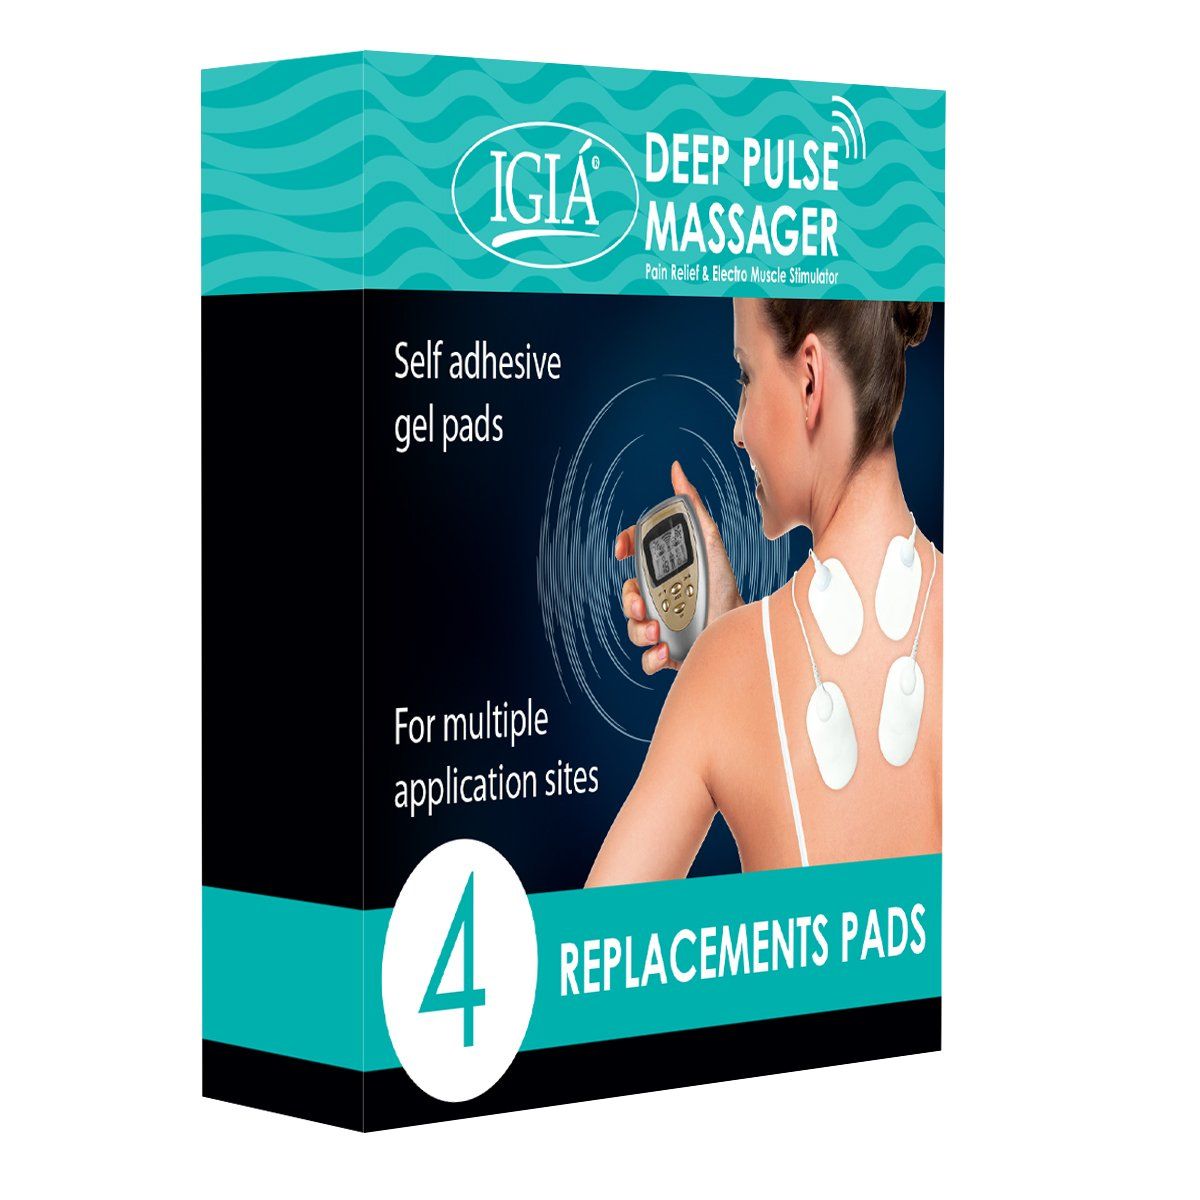 Igia Pulse Massager Replacement Pad